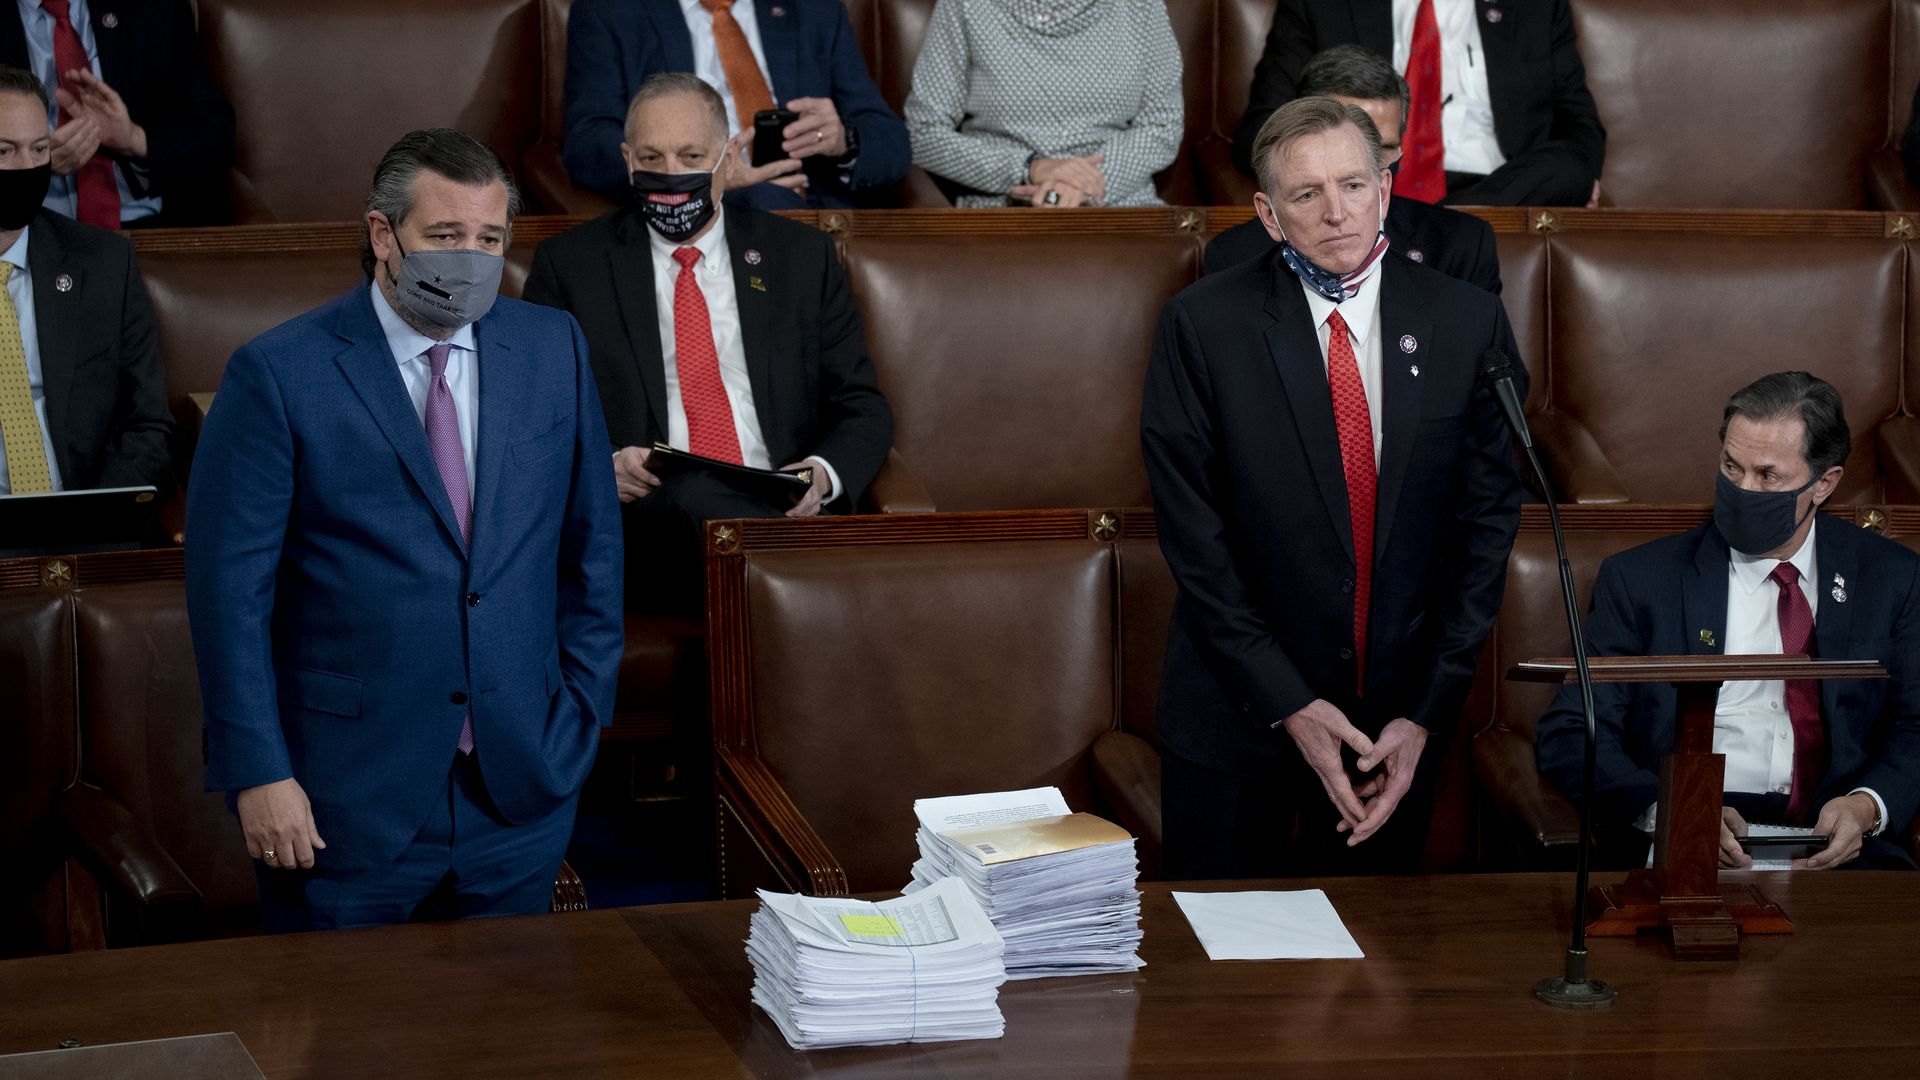 Sen. Ted Cruz and Rep. Paul Gosar are seen objecting to the certification of Arizona's election results on Jan. 6, 2021.